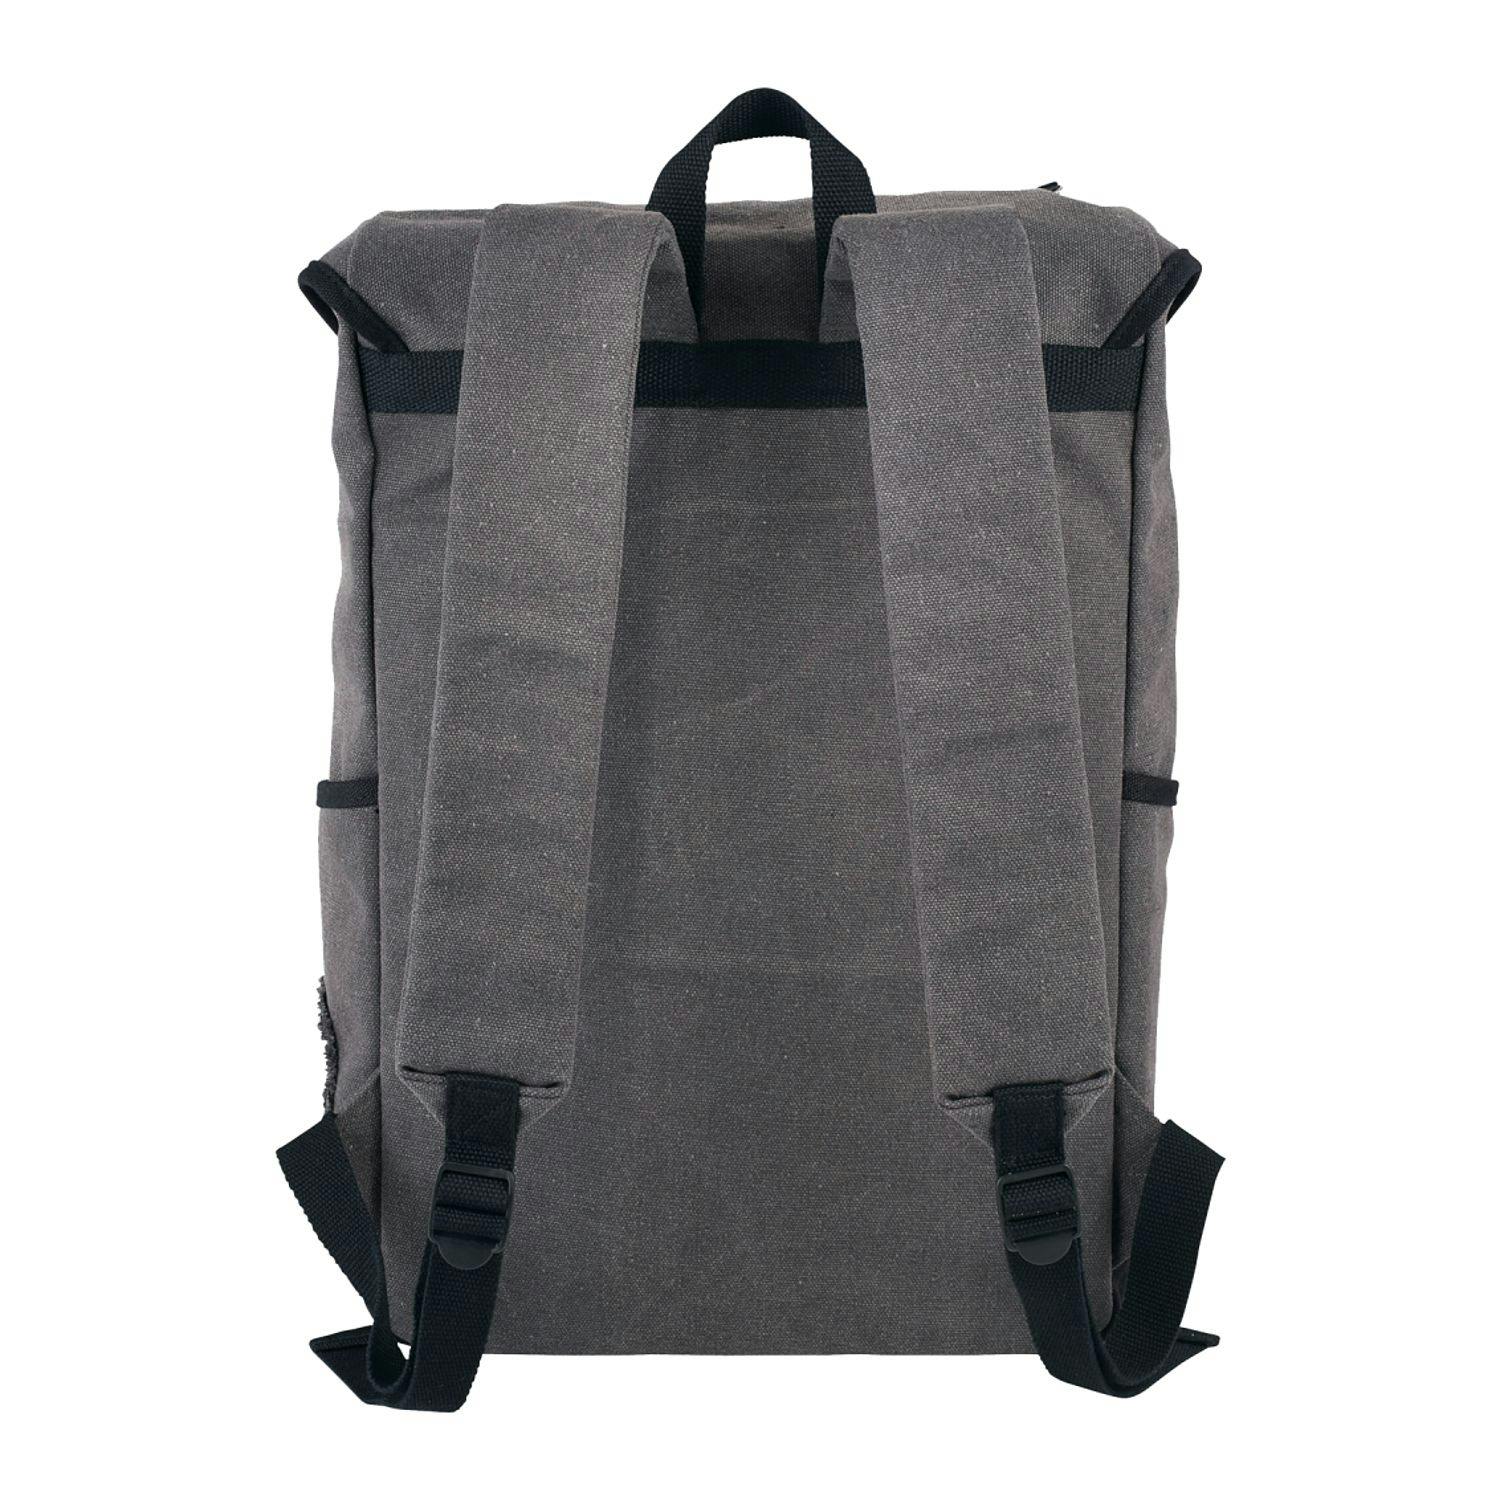 Field & Co. Hudson 15" Computer Backpack - additional Image 2